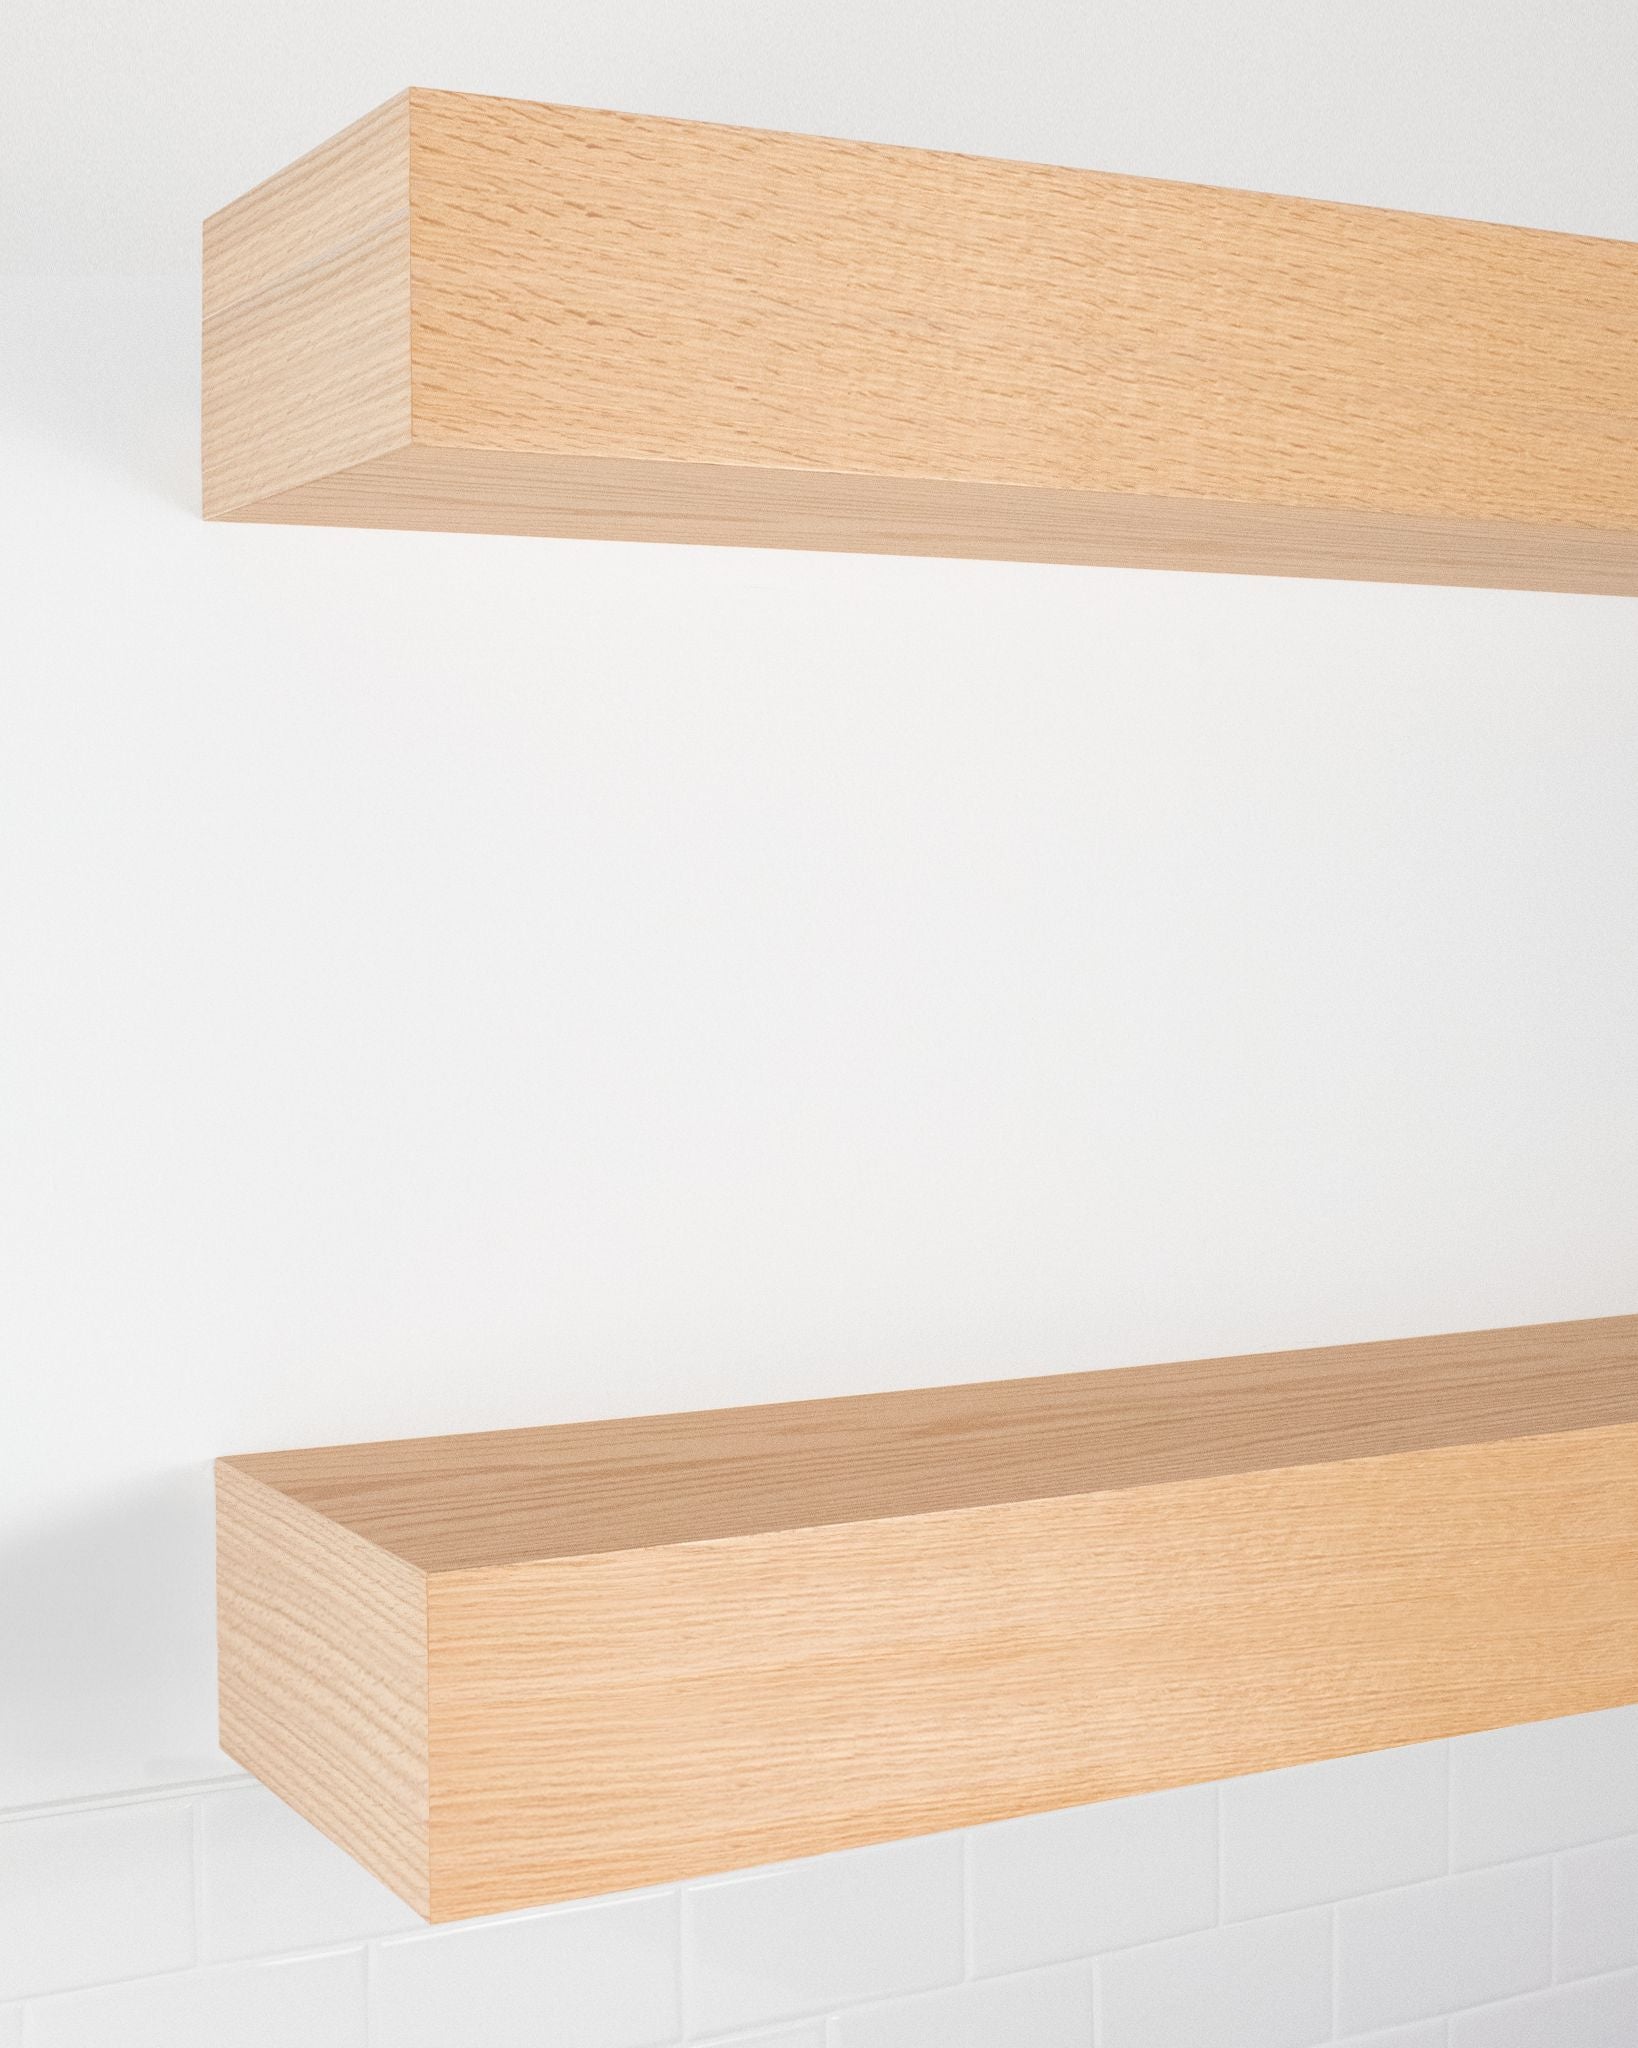 Red Oak Floating Shelves 4.1-6" thick